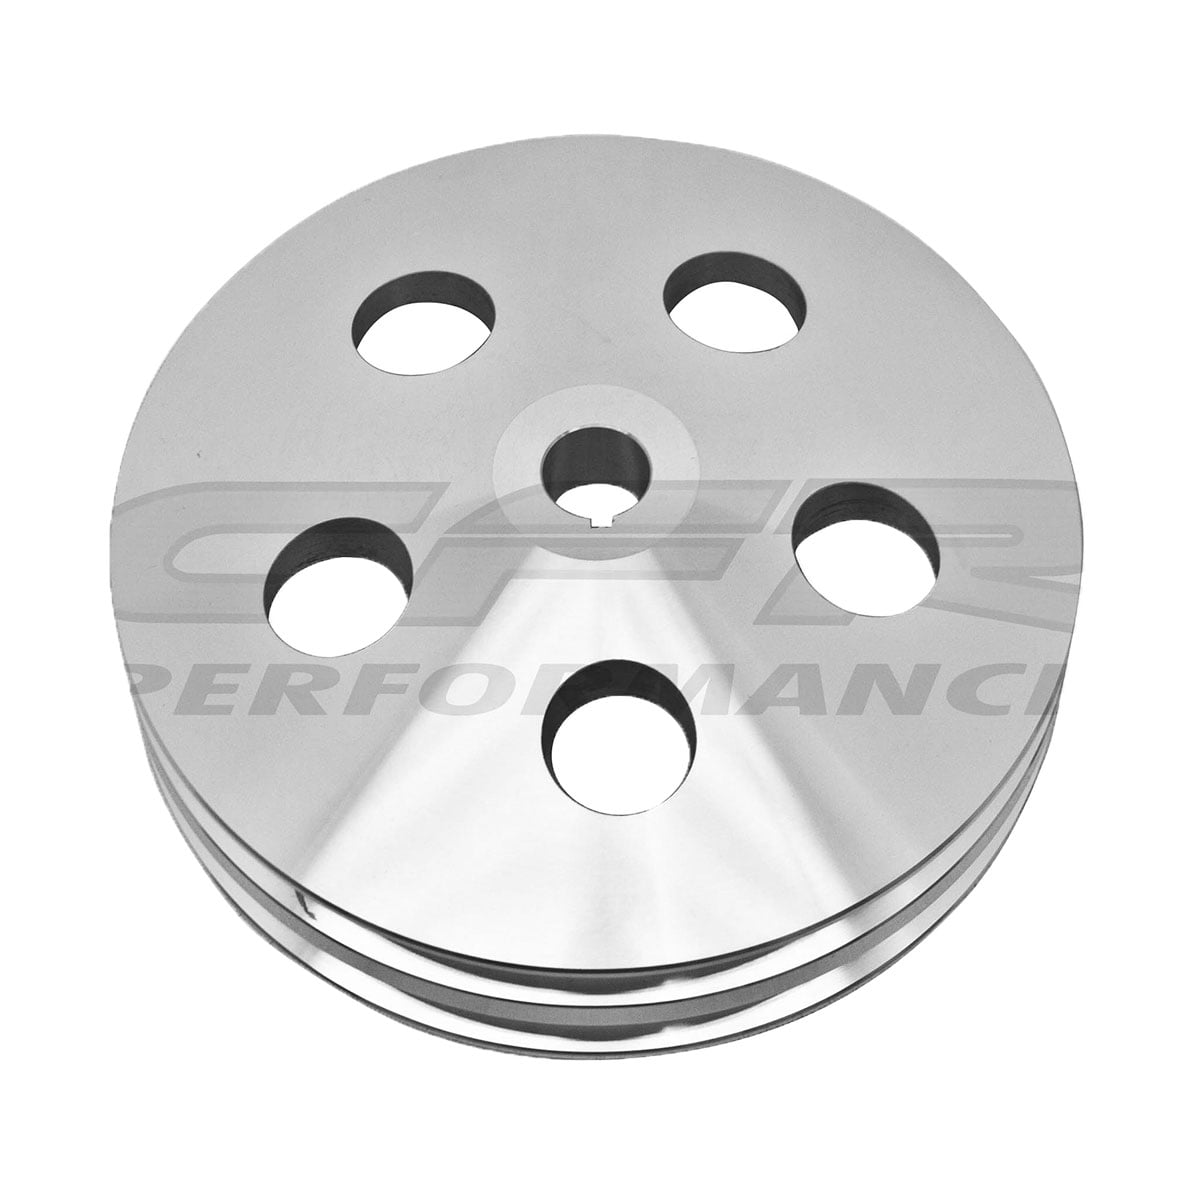 Spectre Performance 4490 Aluminum Double Belt Power Steering Pulley for GM Keyway Type 